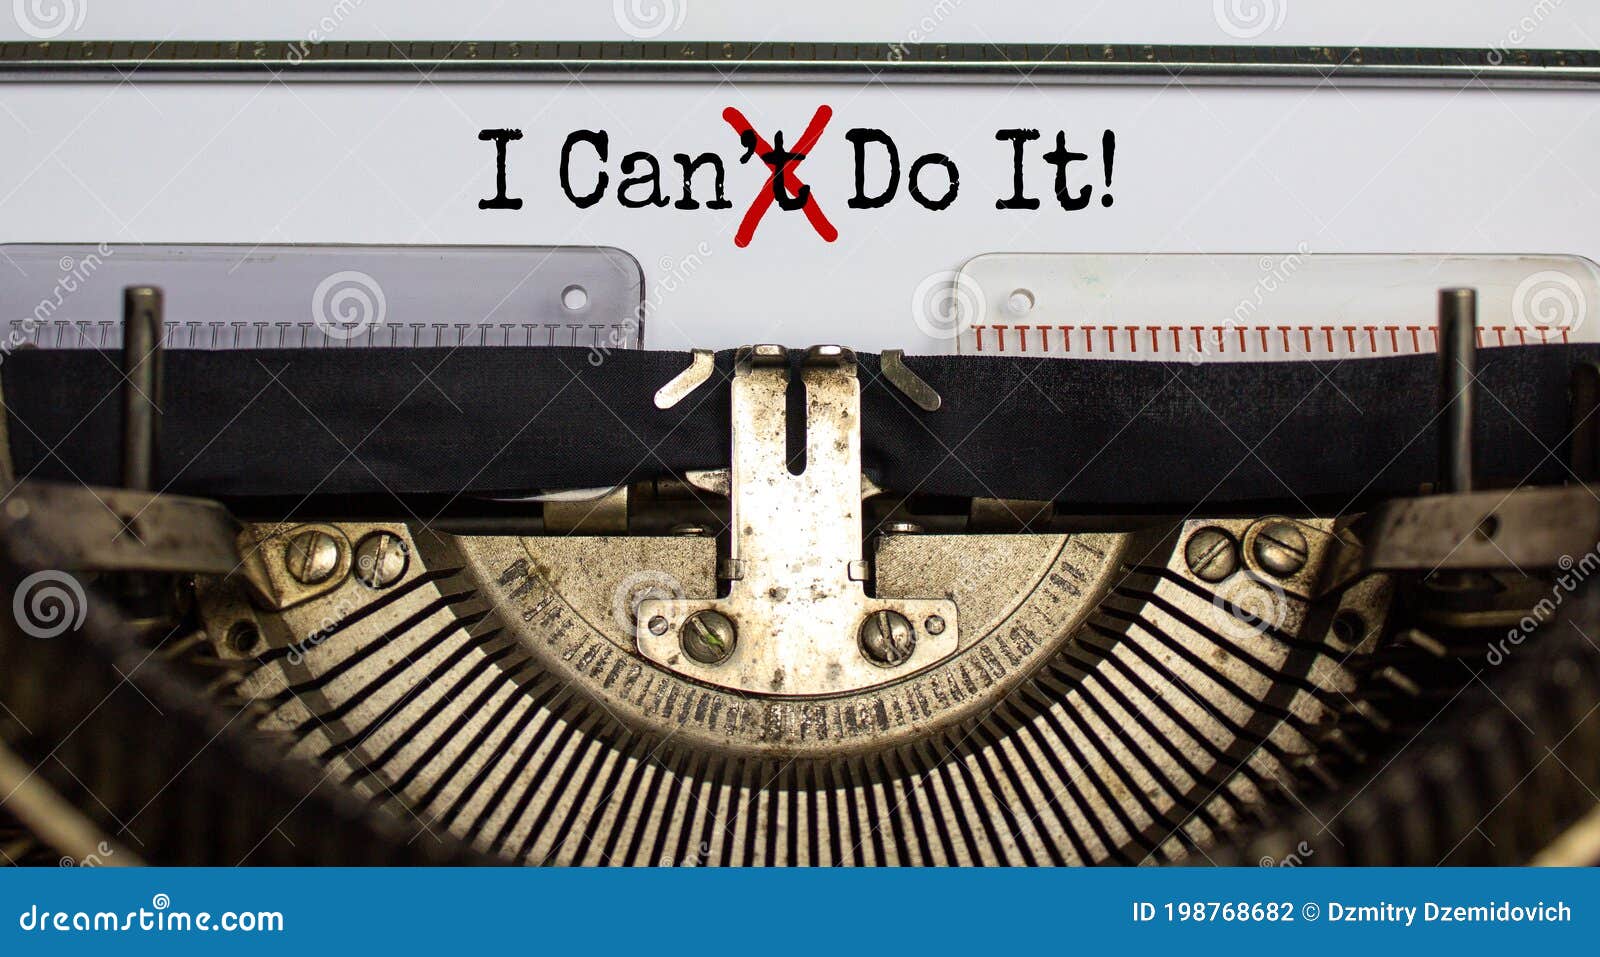 cant crossed out to read i can do it concept for self belief, positive attitude and motivation written on an old typewriter